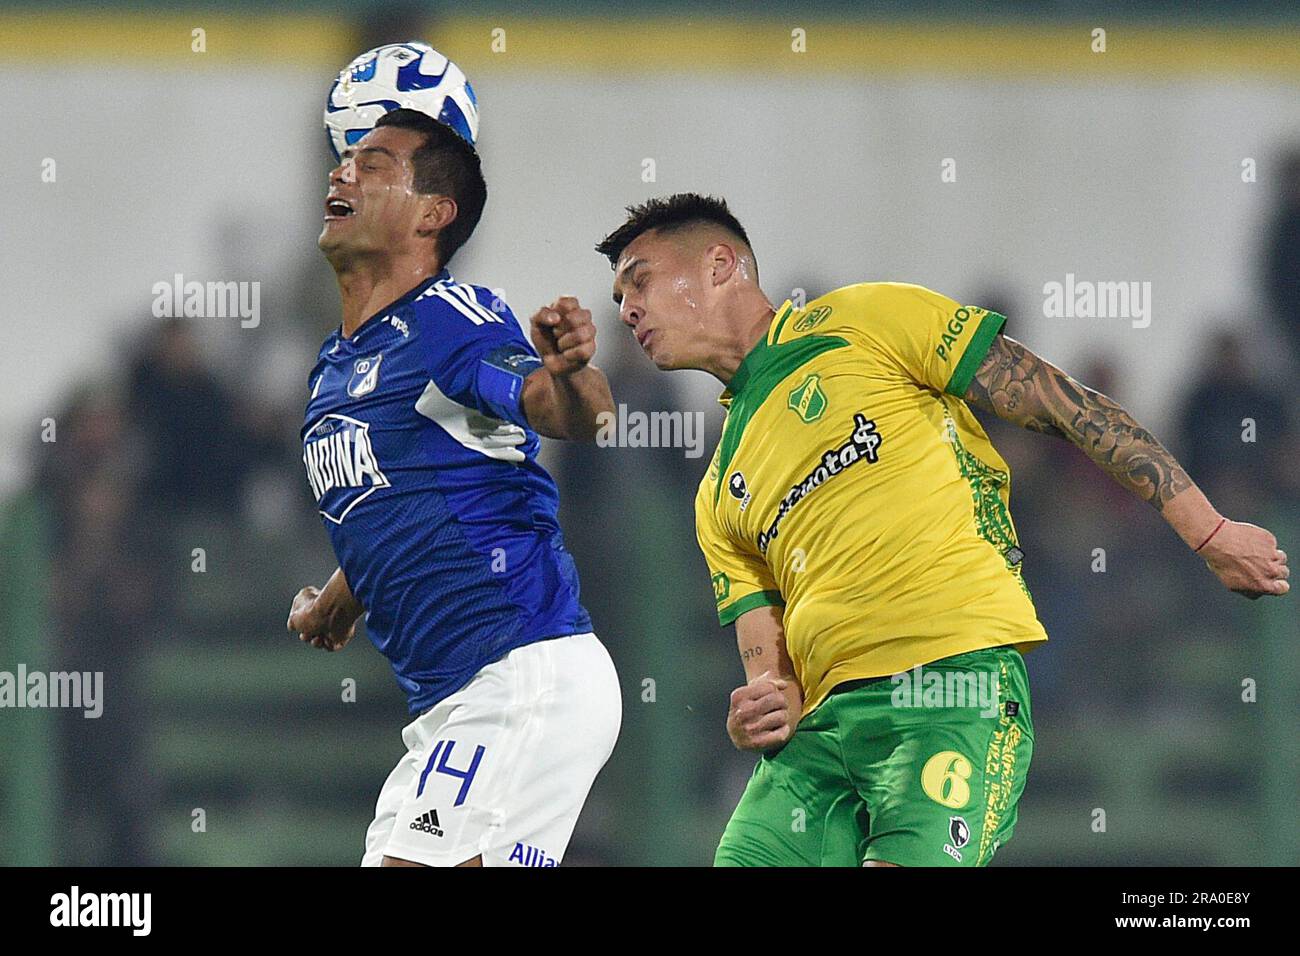 David Silva of Colombia's Millonarios, left, heads to score his side's  opening goal against Brazil's Atletico Mineiro during a Copa Libertadores  soccer match at El Campin stadium in Bogota, Colombia, Wednesday, March